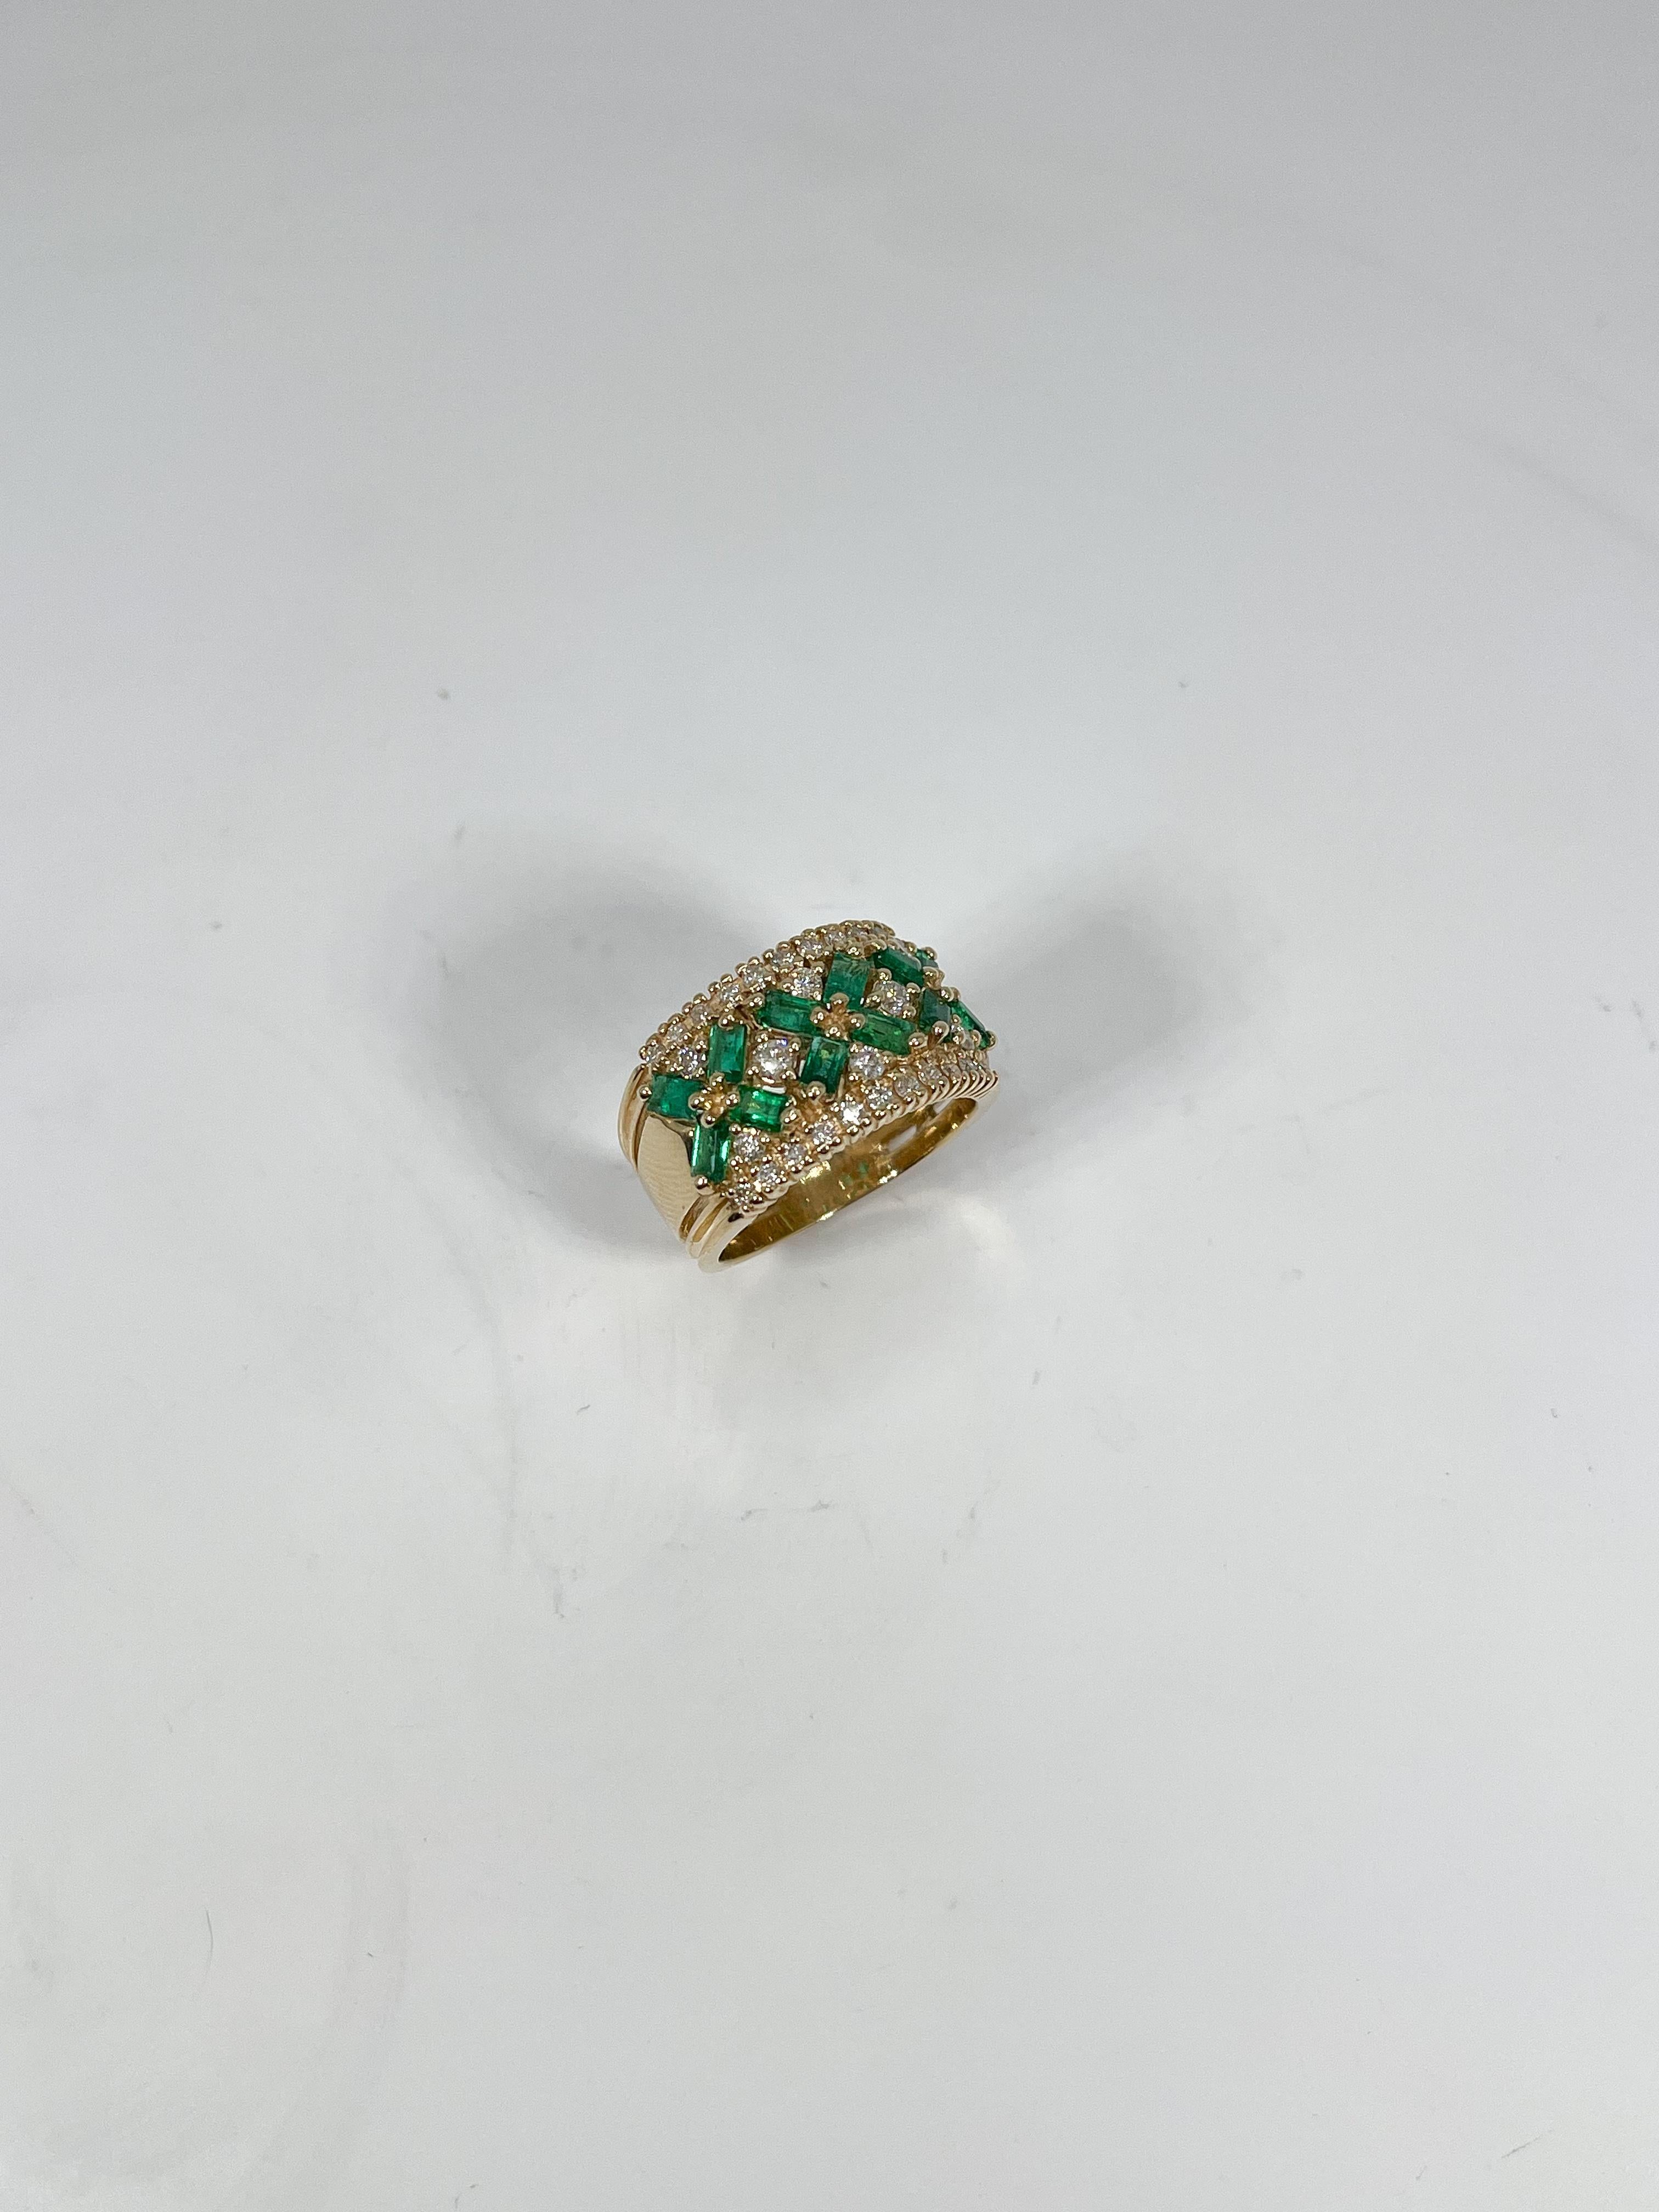 14k yellow gold contemporary emerald and diamond ring. The emeralds are baguettes, and the diamonds are round, the ring size is a 5 3/4, the width is 11.5 mm, and has a total weight of 6.84 grams. 